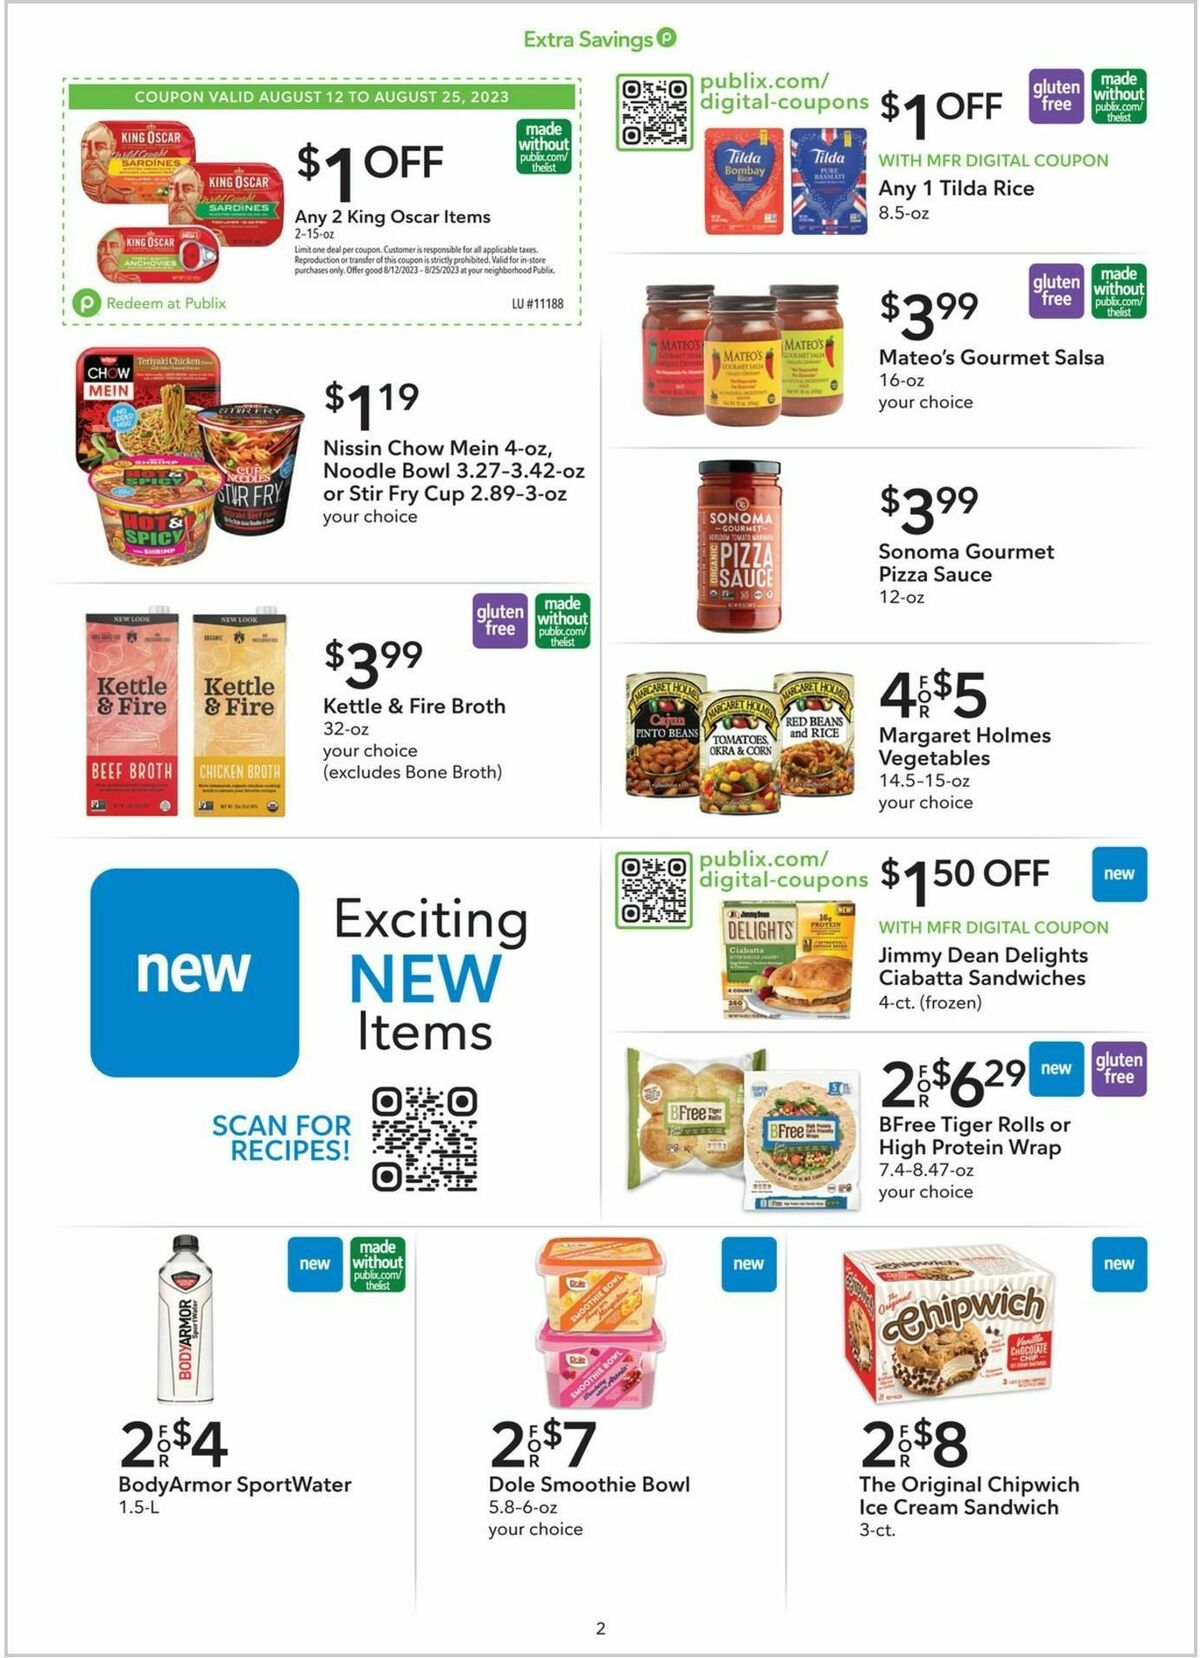 Publix Extra Savings Weekly Ad from August 12